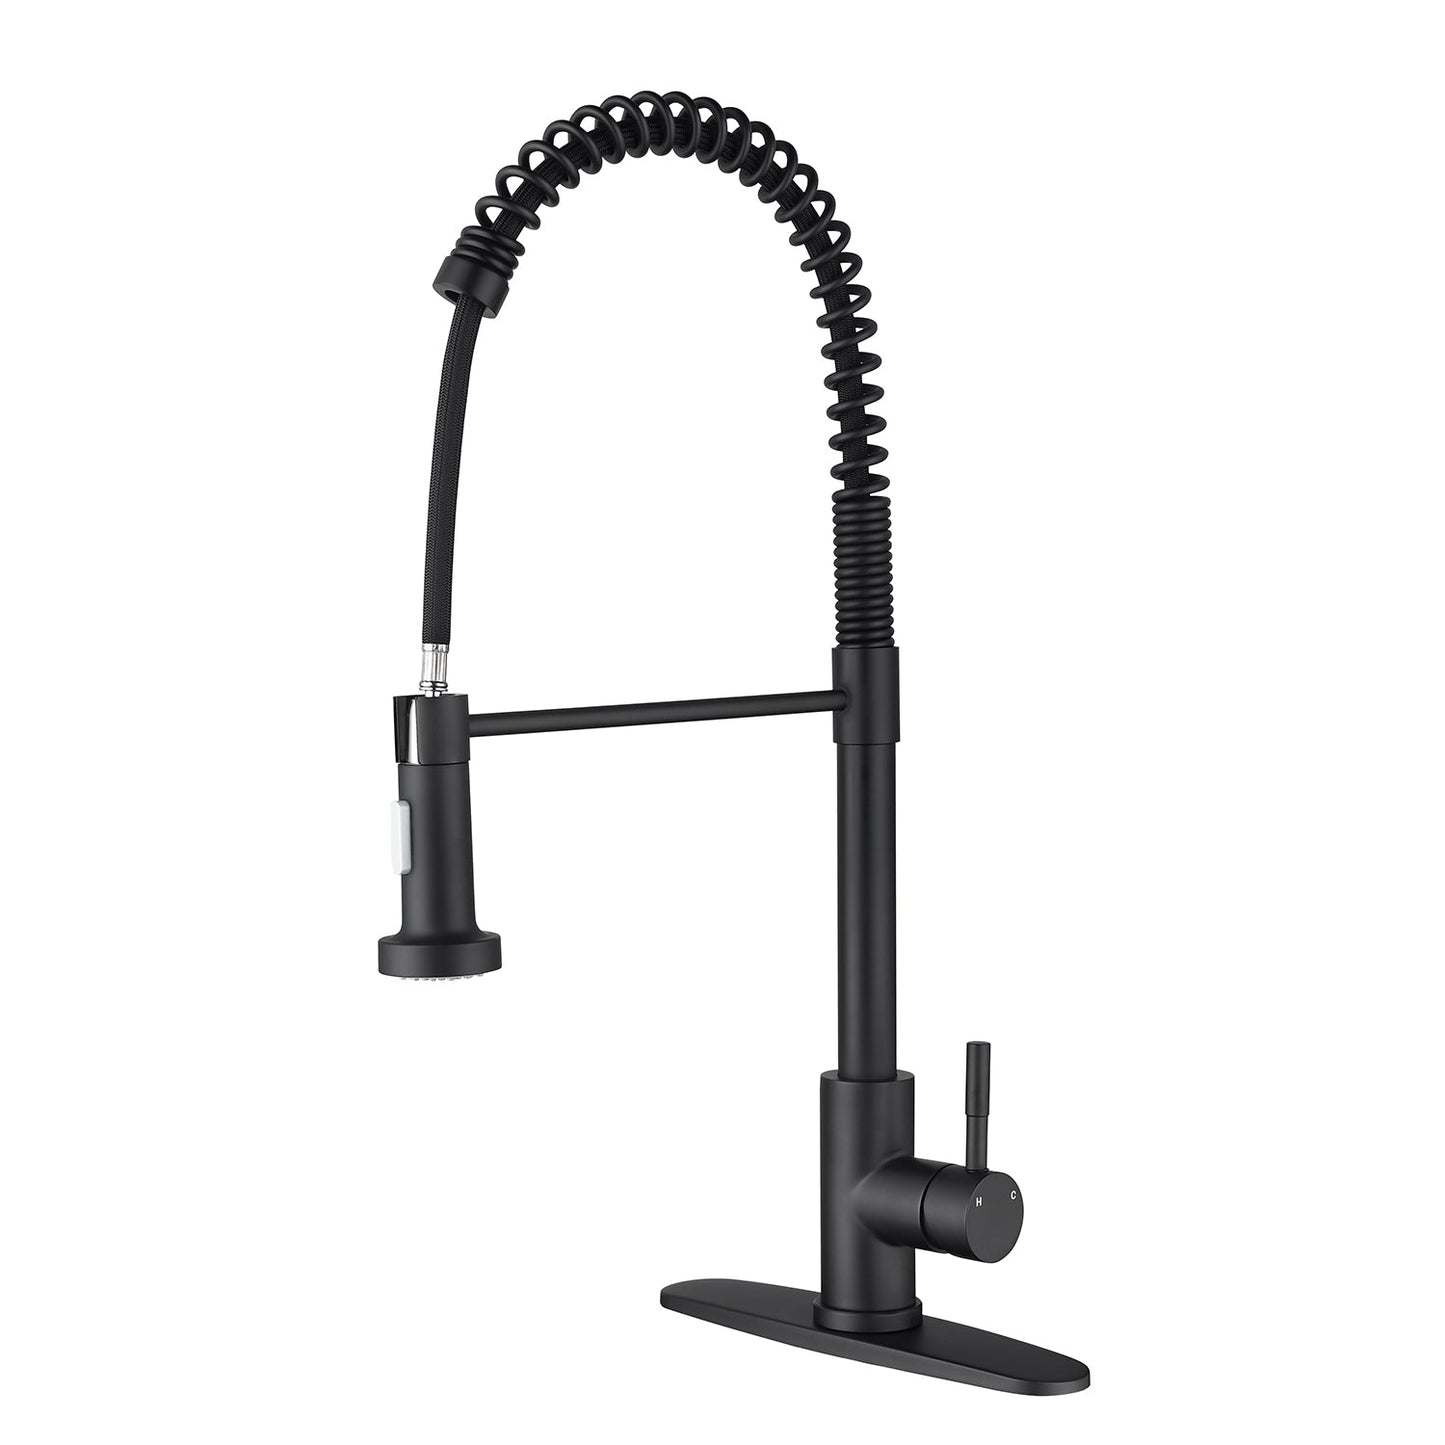 Kitchen Faucet with Pull Out Spraye - Demine Essentials